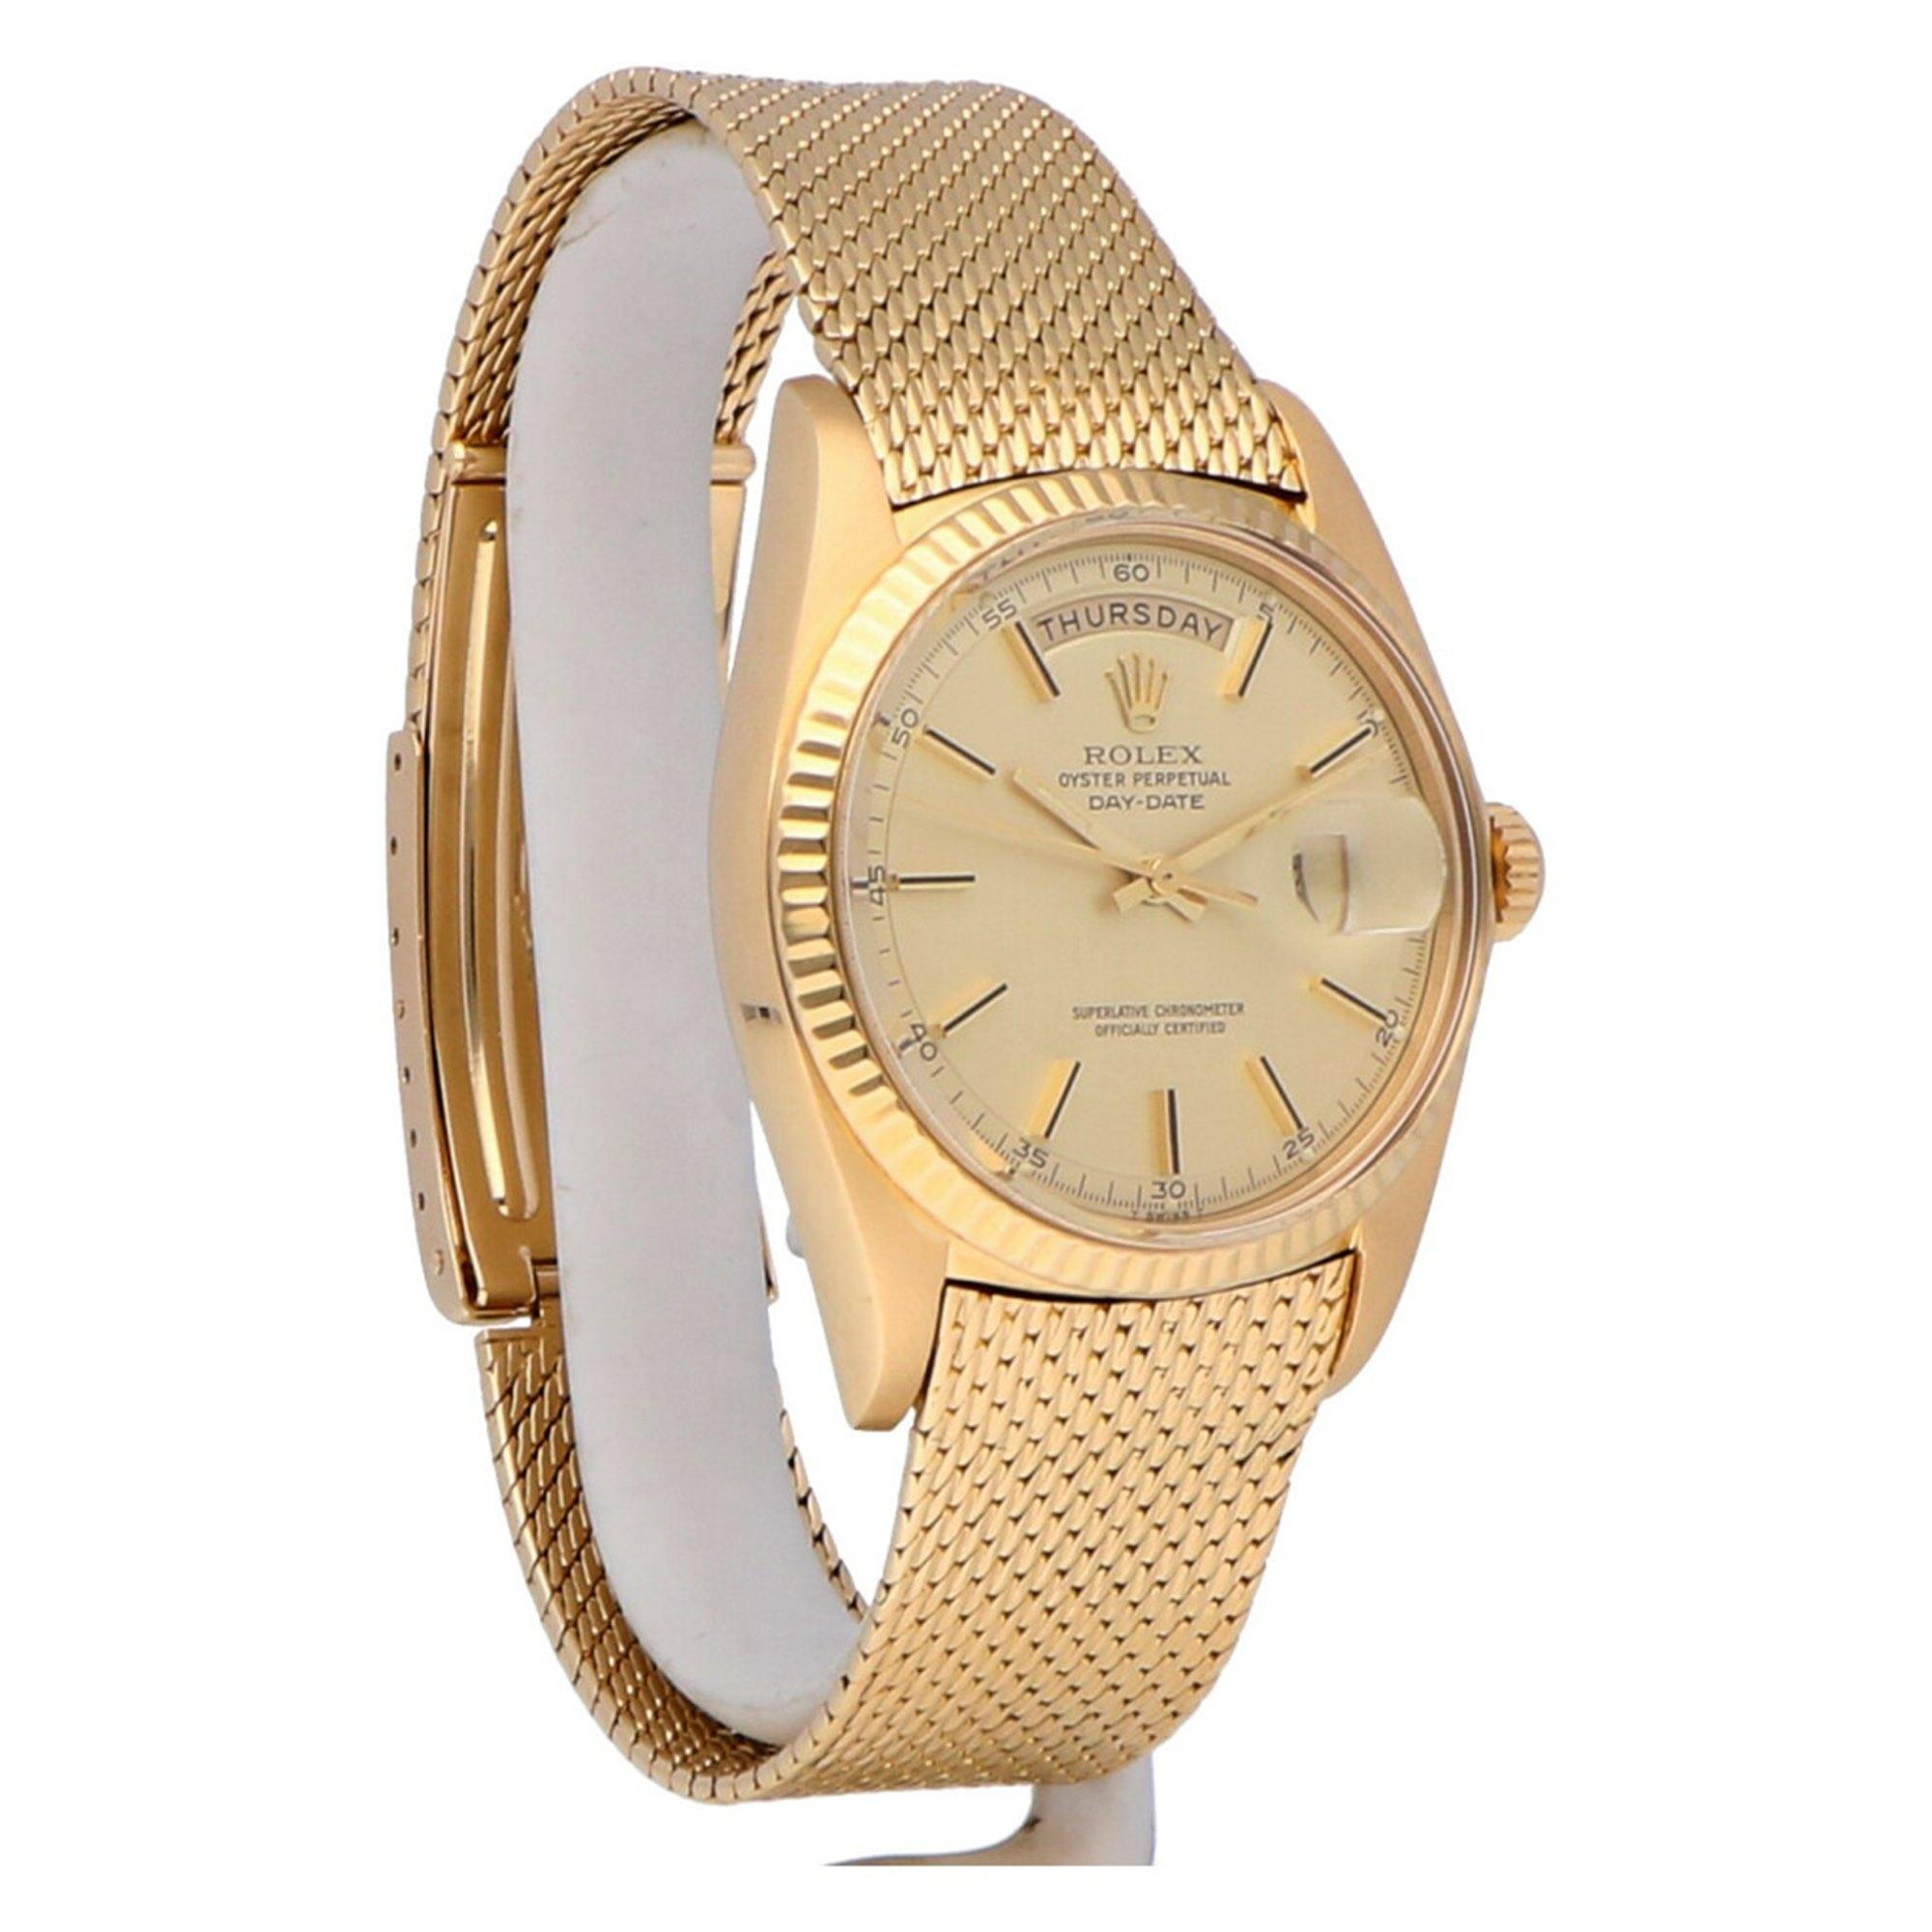 Pre-Owned Rolex Day-Date 18 Karat Yellow Gold 1803 Watch 1